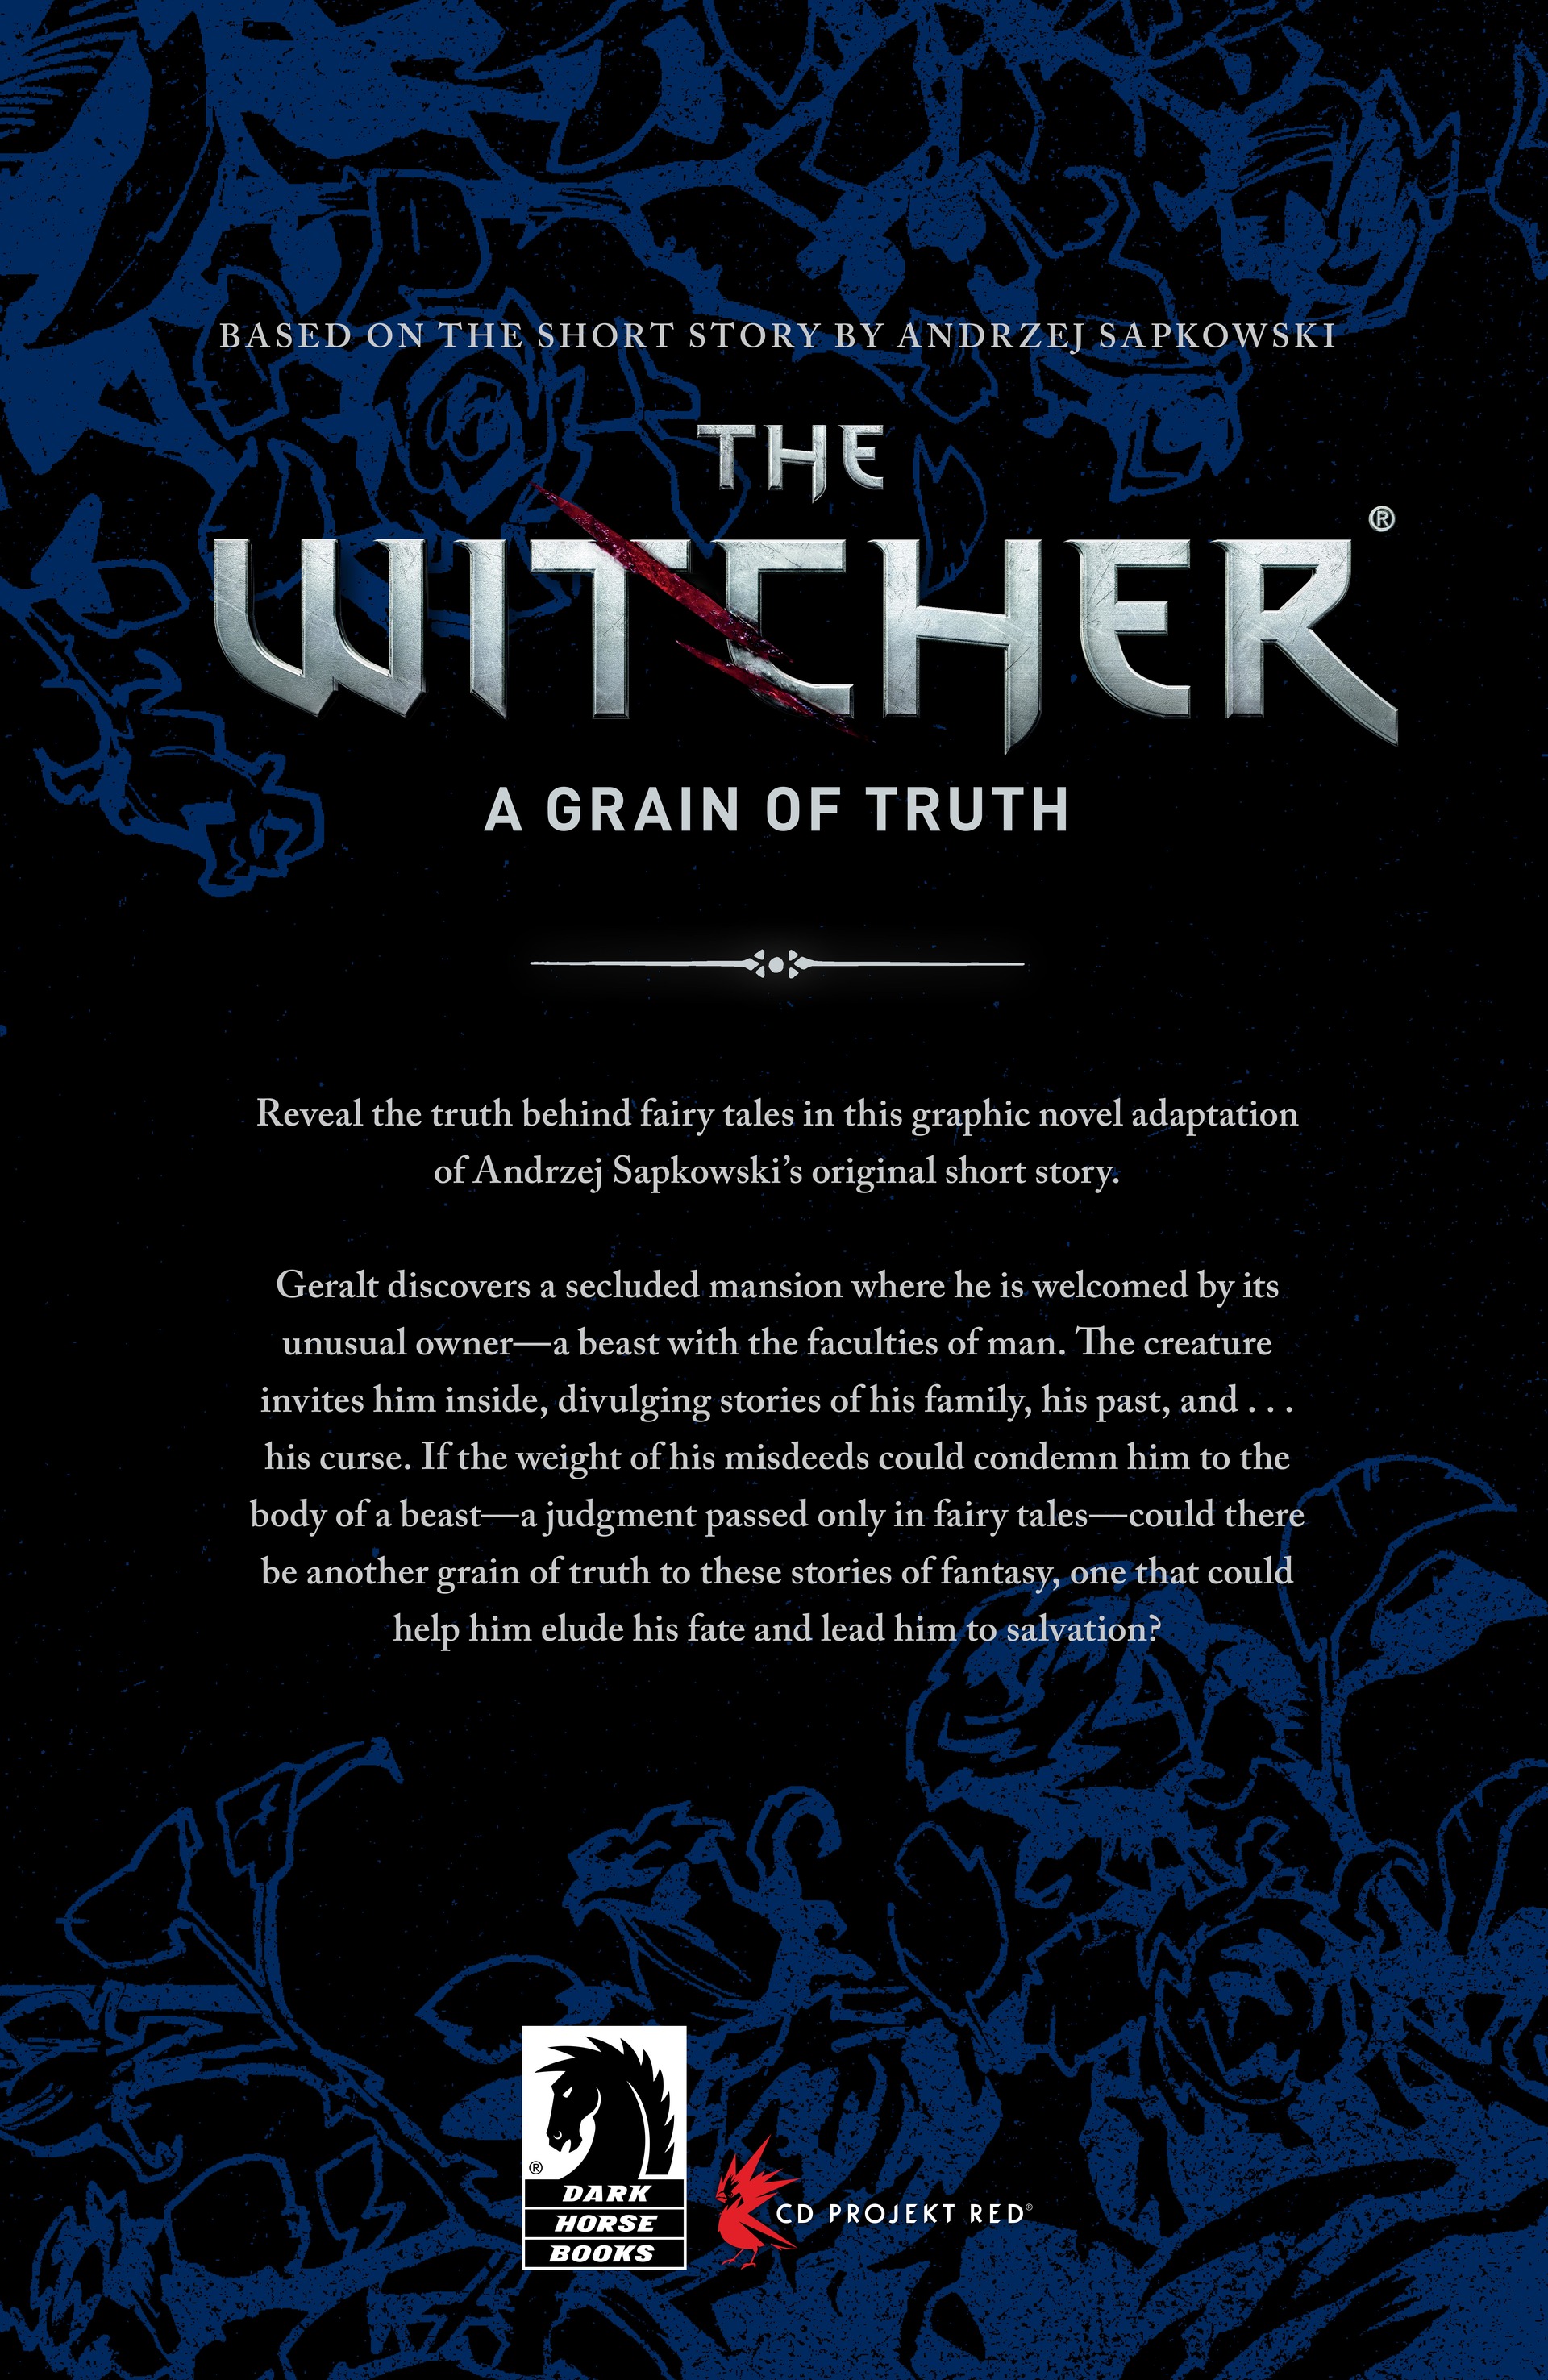 Read online The Witcher: A Grain of Truth comic -  Issue # Full - 59